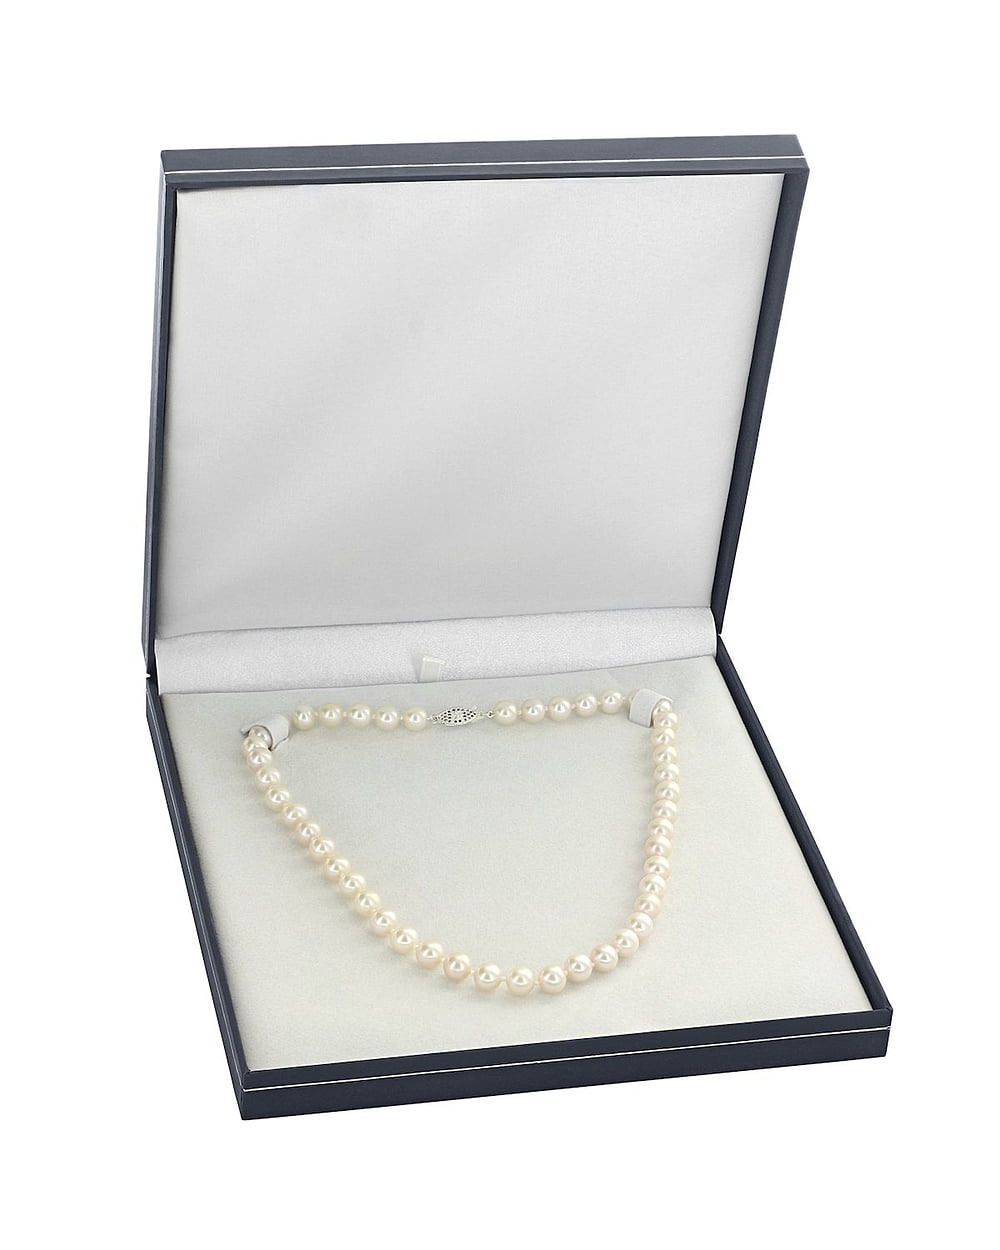 THE PEARL SOURCE 14K Gold AAA Quality White Freshwater Cultured Pearl Necklace for Women in 18 Princess Length 